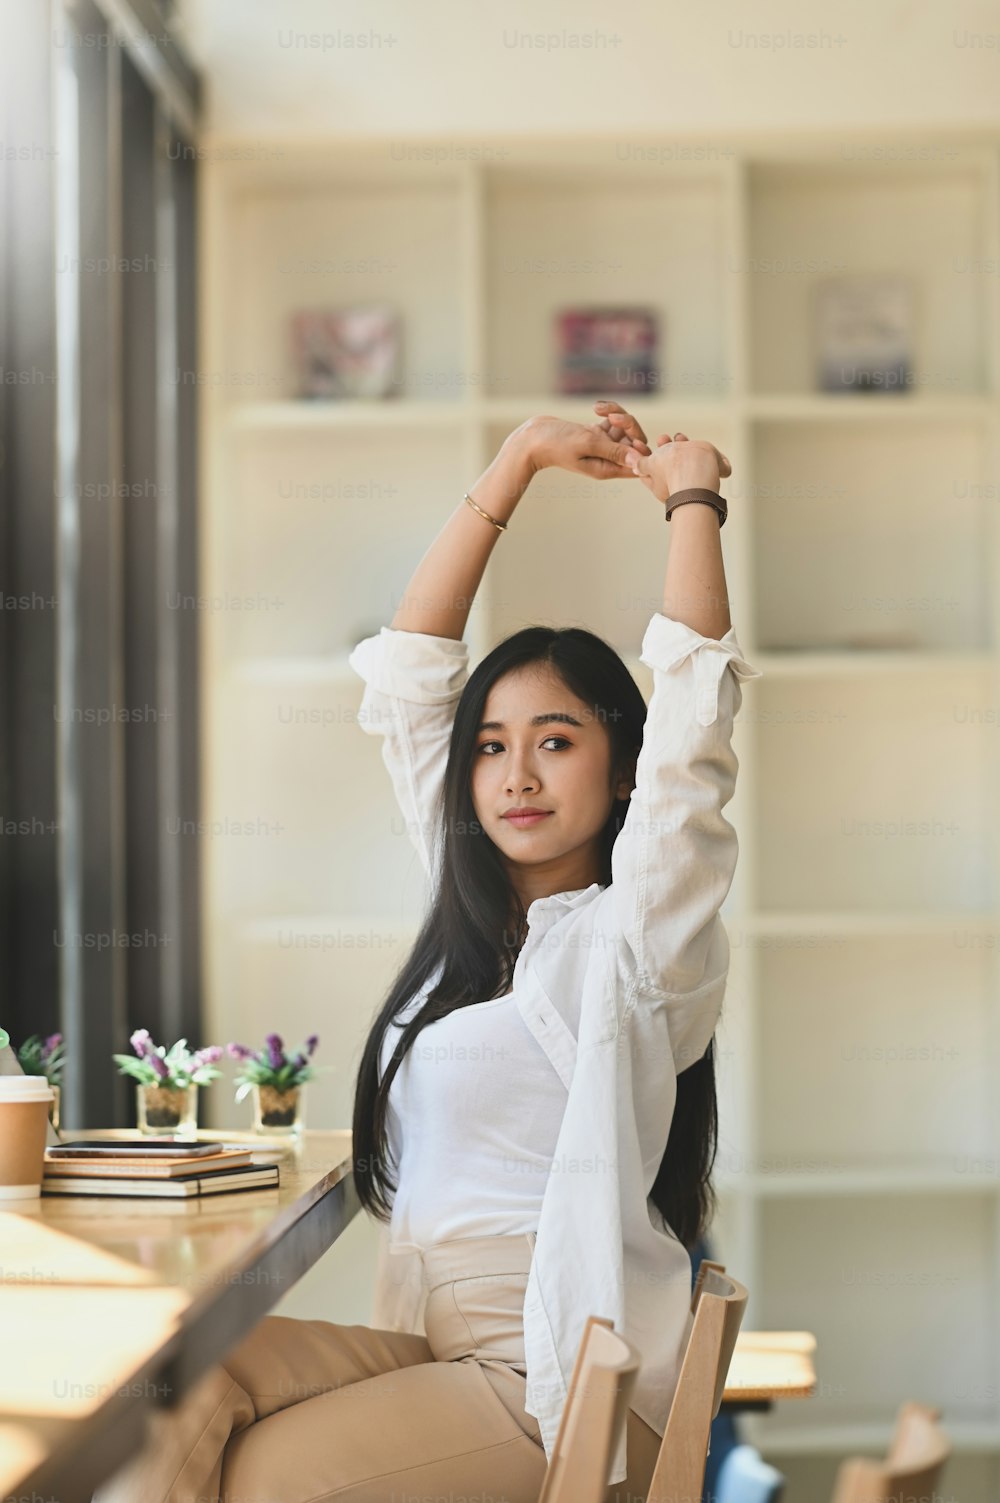 Photo of beautiful woman in white shirt that working as secretary stretching her hands while sitting at the modern wooden counter bar with cafe book shelf as background. Relaxing girl concept.